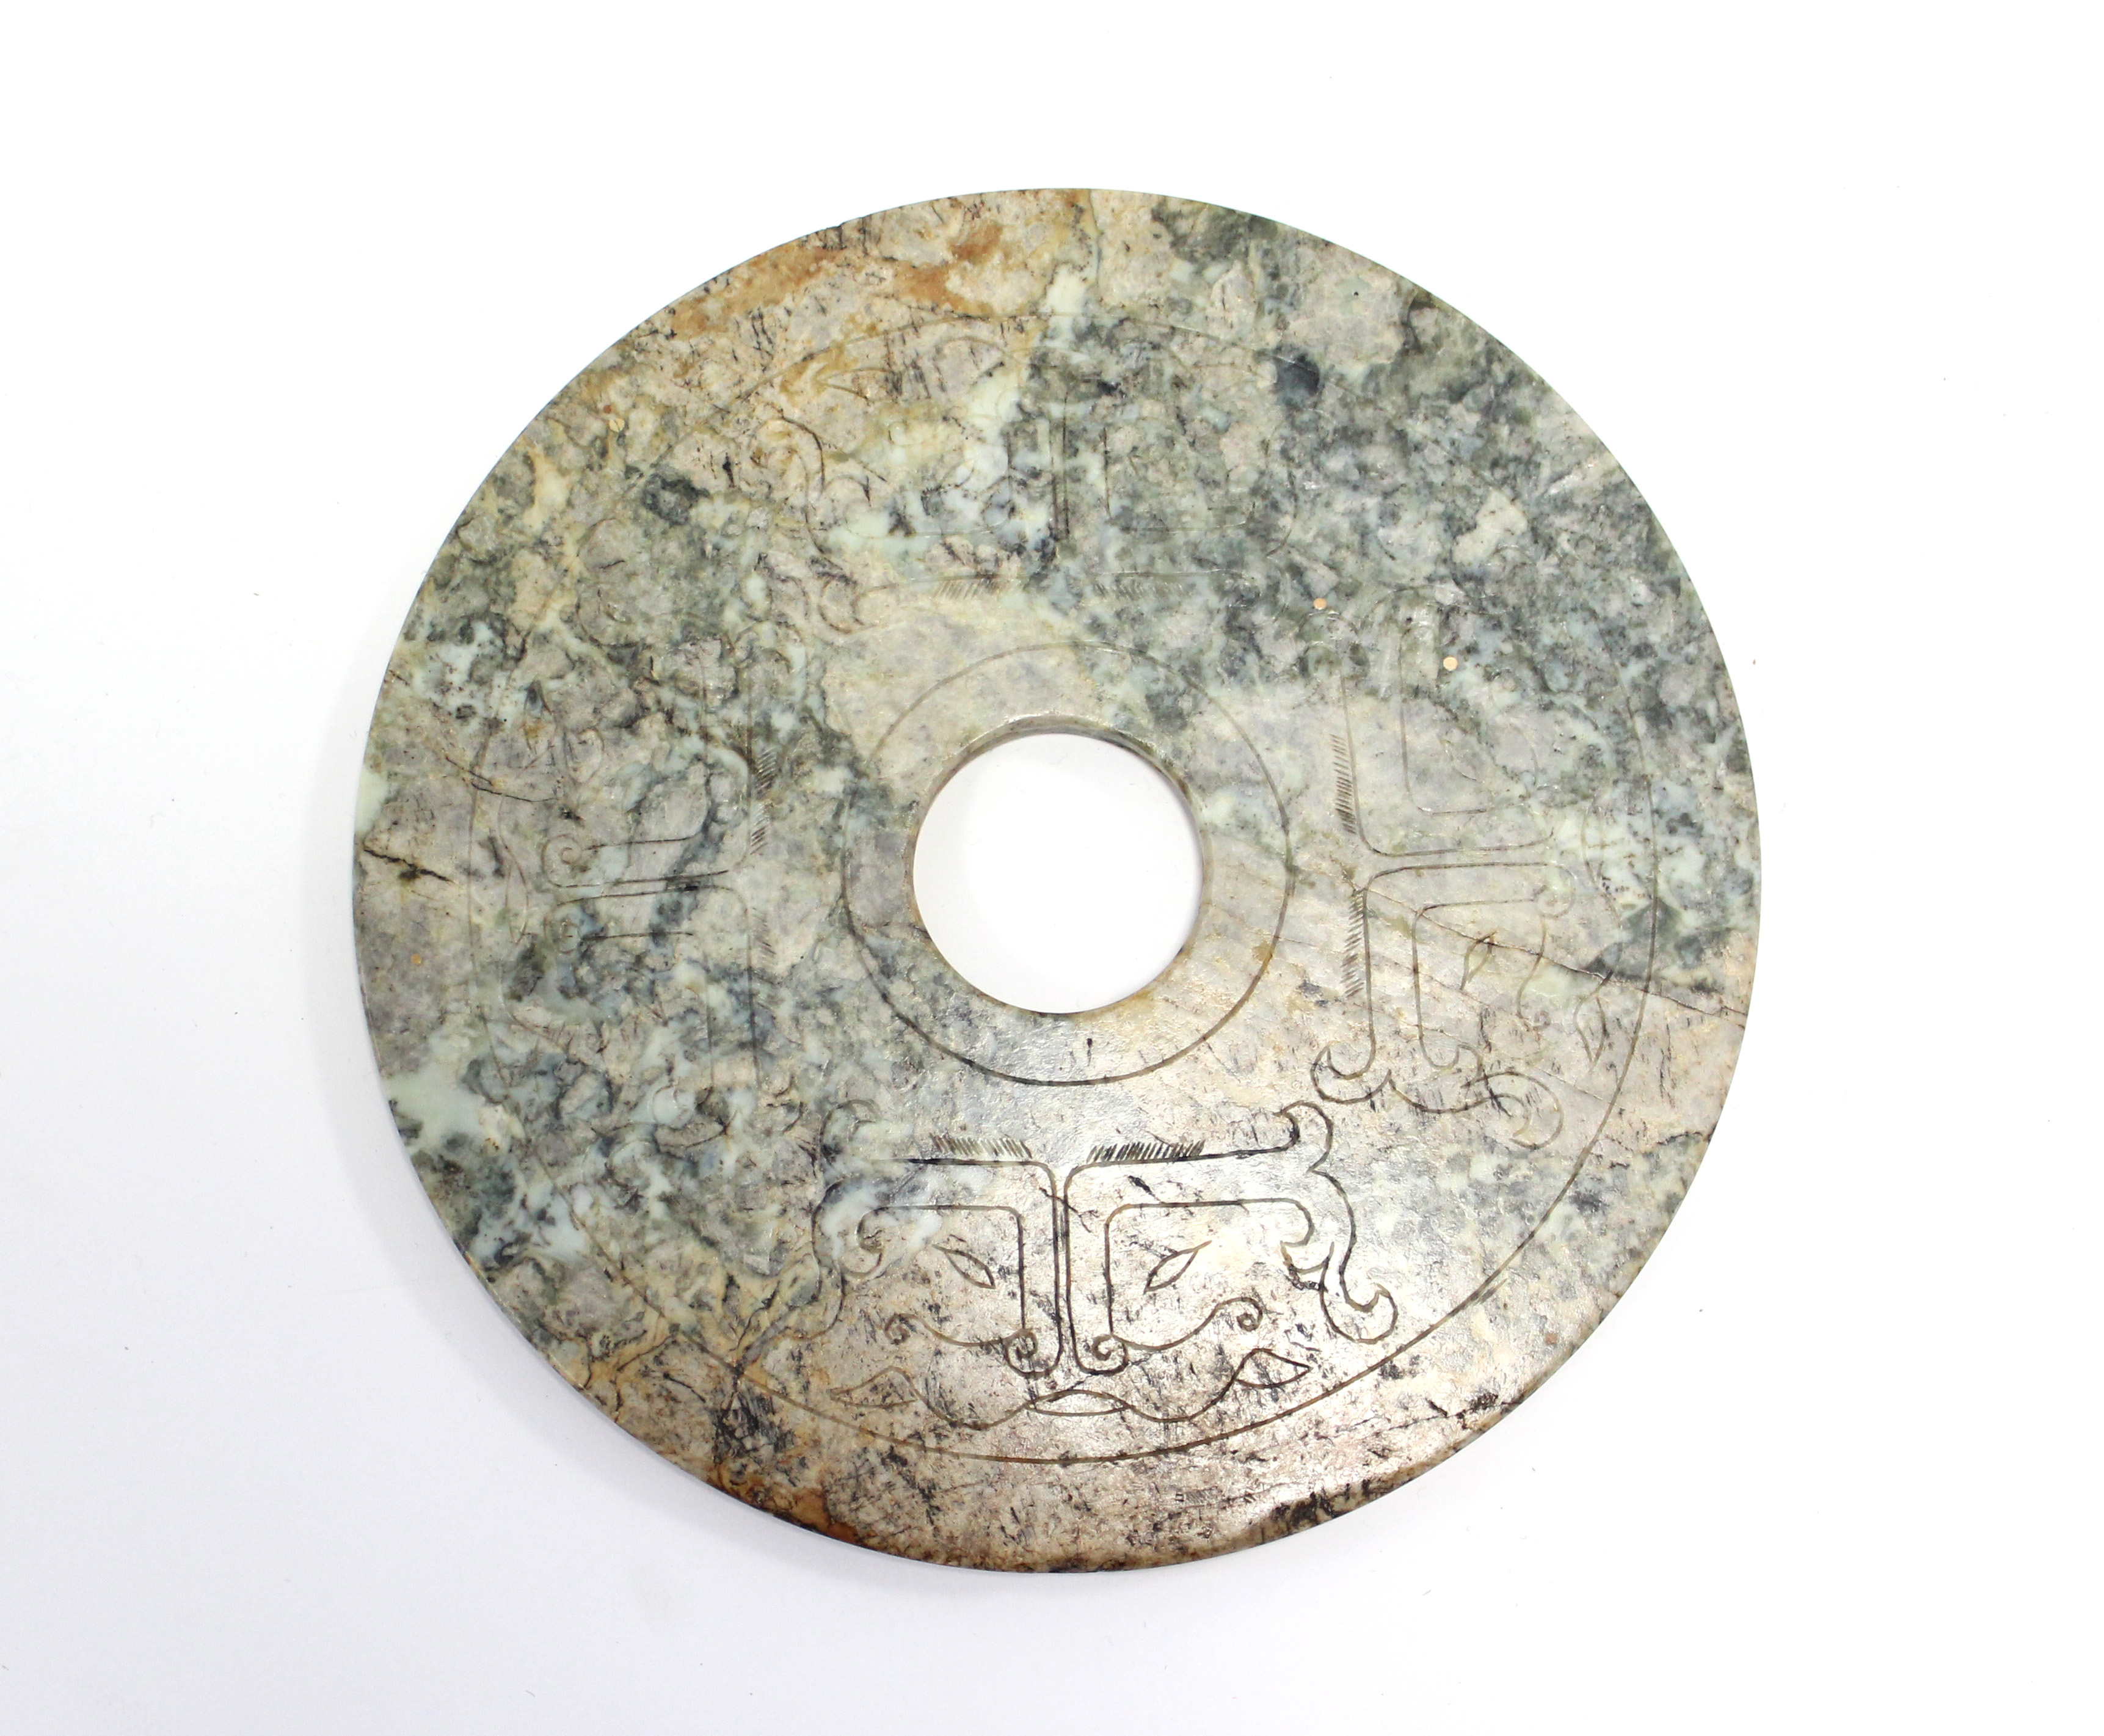 A CHINESE ARCHAISTIC CARVED JADE DISC (BI), the stone of mottled green, russet, & grey tone, the - Image 3 of 3